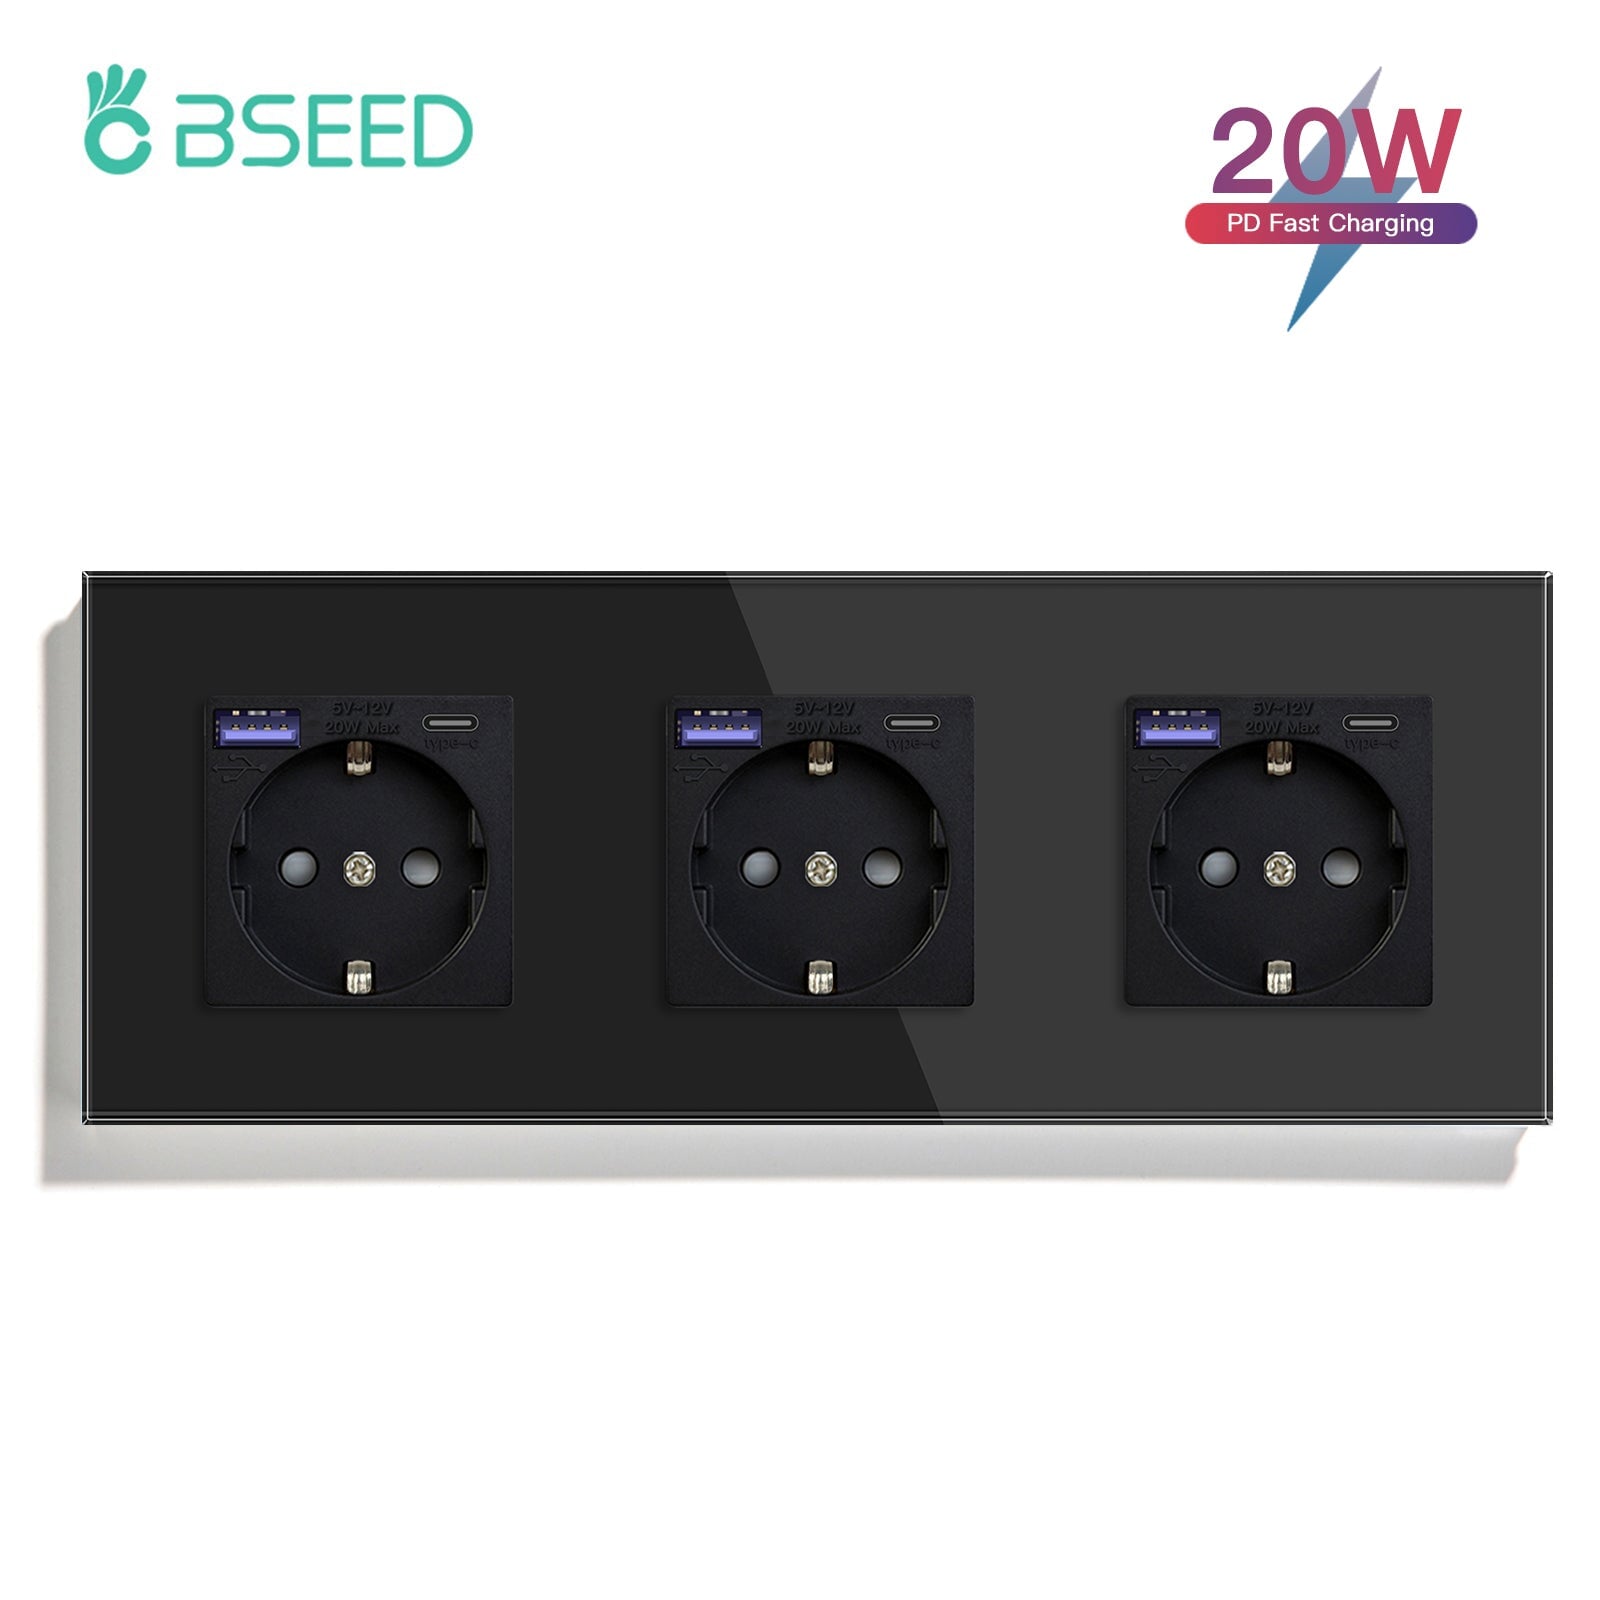 BSEED EU sockets with 20W PD Fast Charge Type-C Interface Outlet Wall Socket Power Outlets & Sockets Bseedswitch Black Triple 